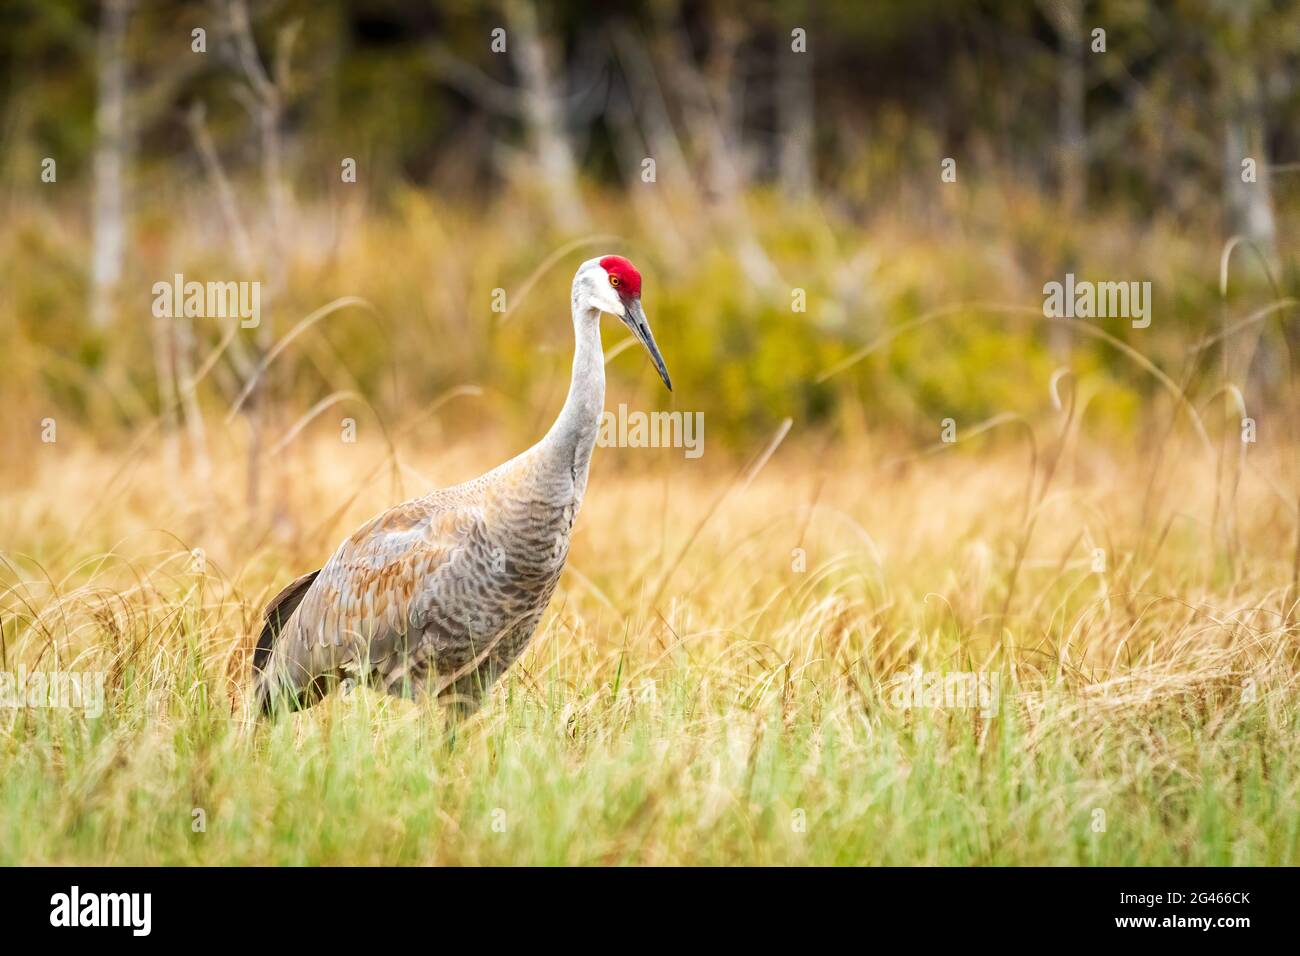 A Sandhill Crane spends some late evening time at the Judy Meissner nature conservancy near Fish Creek in Door County Wisconsin looking for a meal. Stock Photo